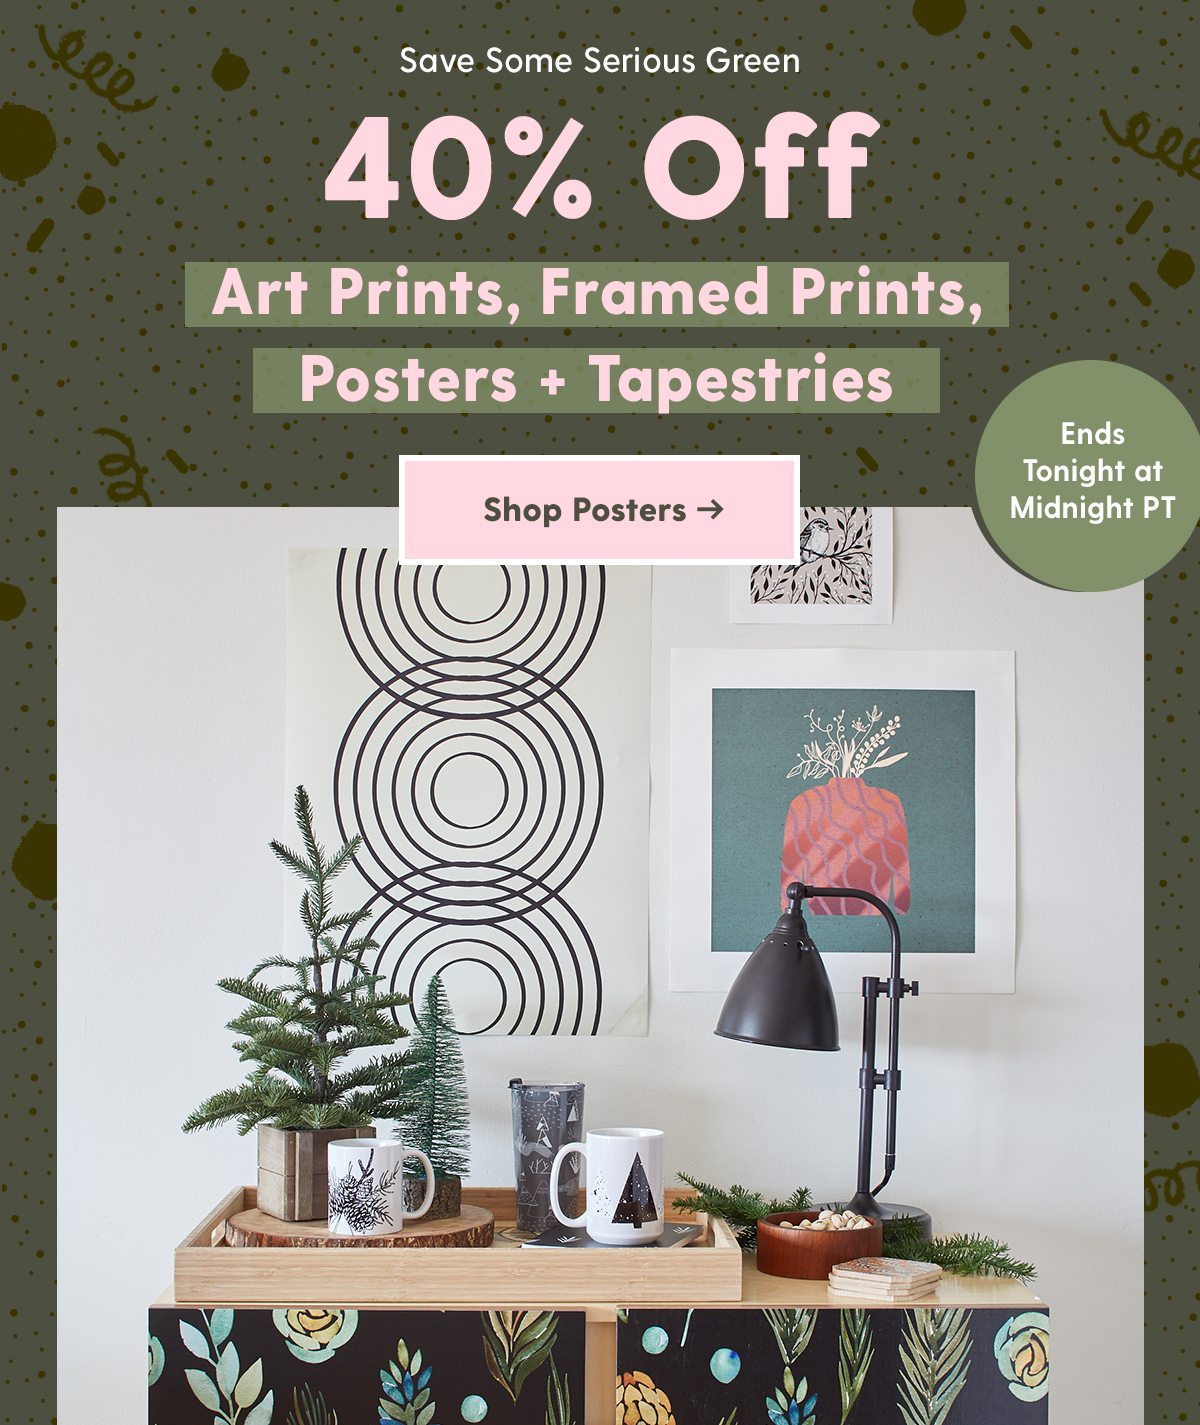 Save Some Serious Green40% Off Art Prints, Framed Prints, Posters + TapestriesShop Posters >